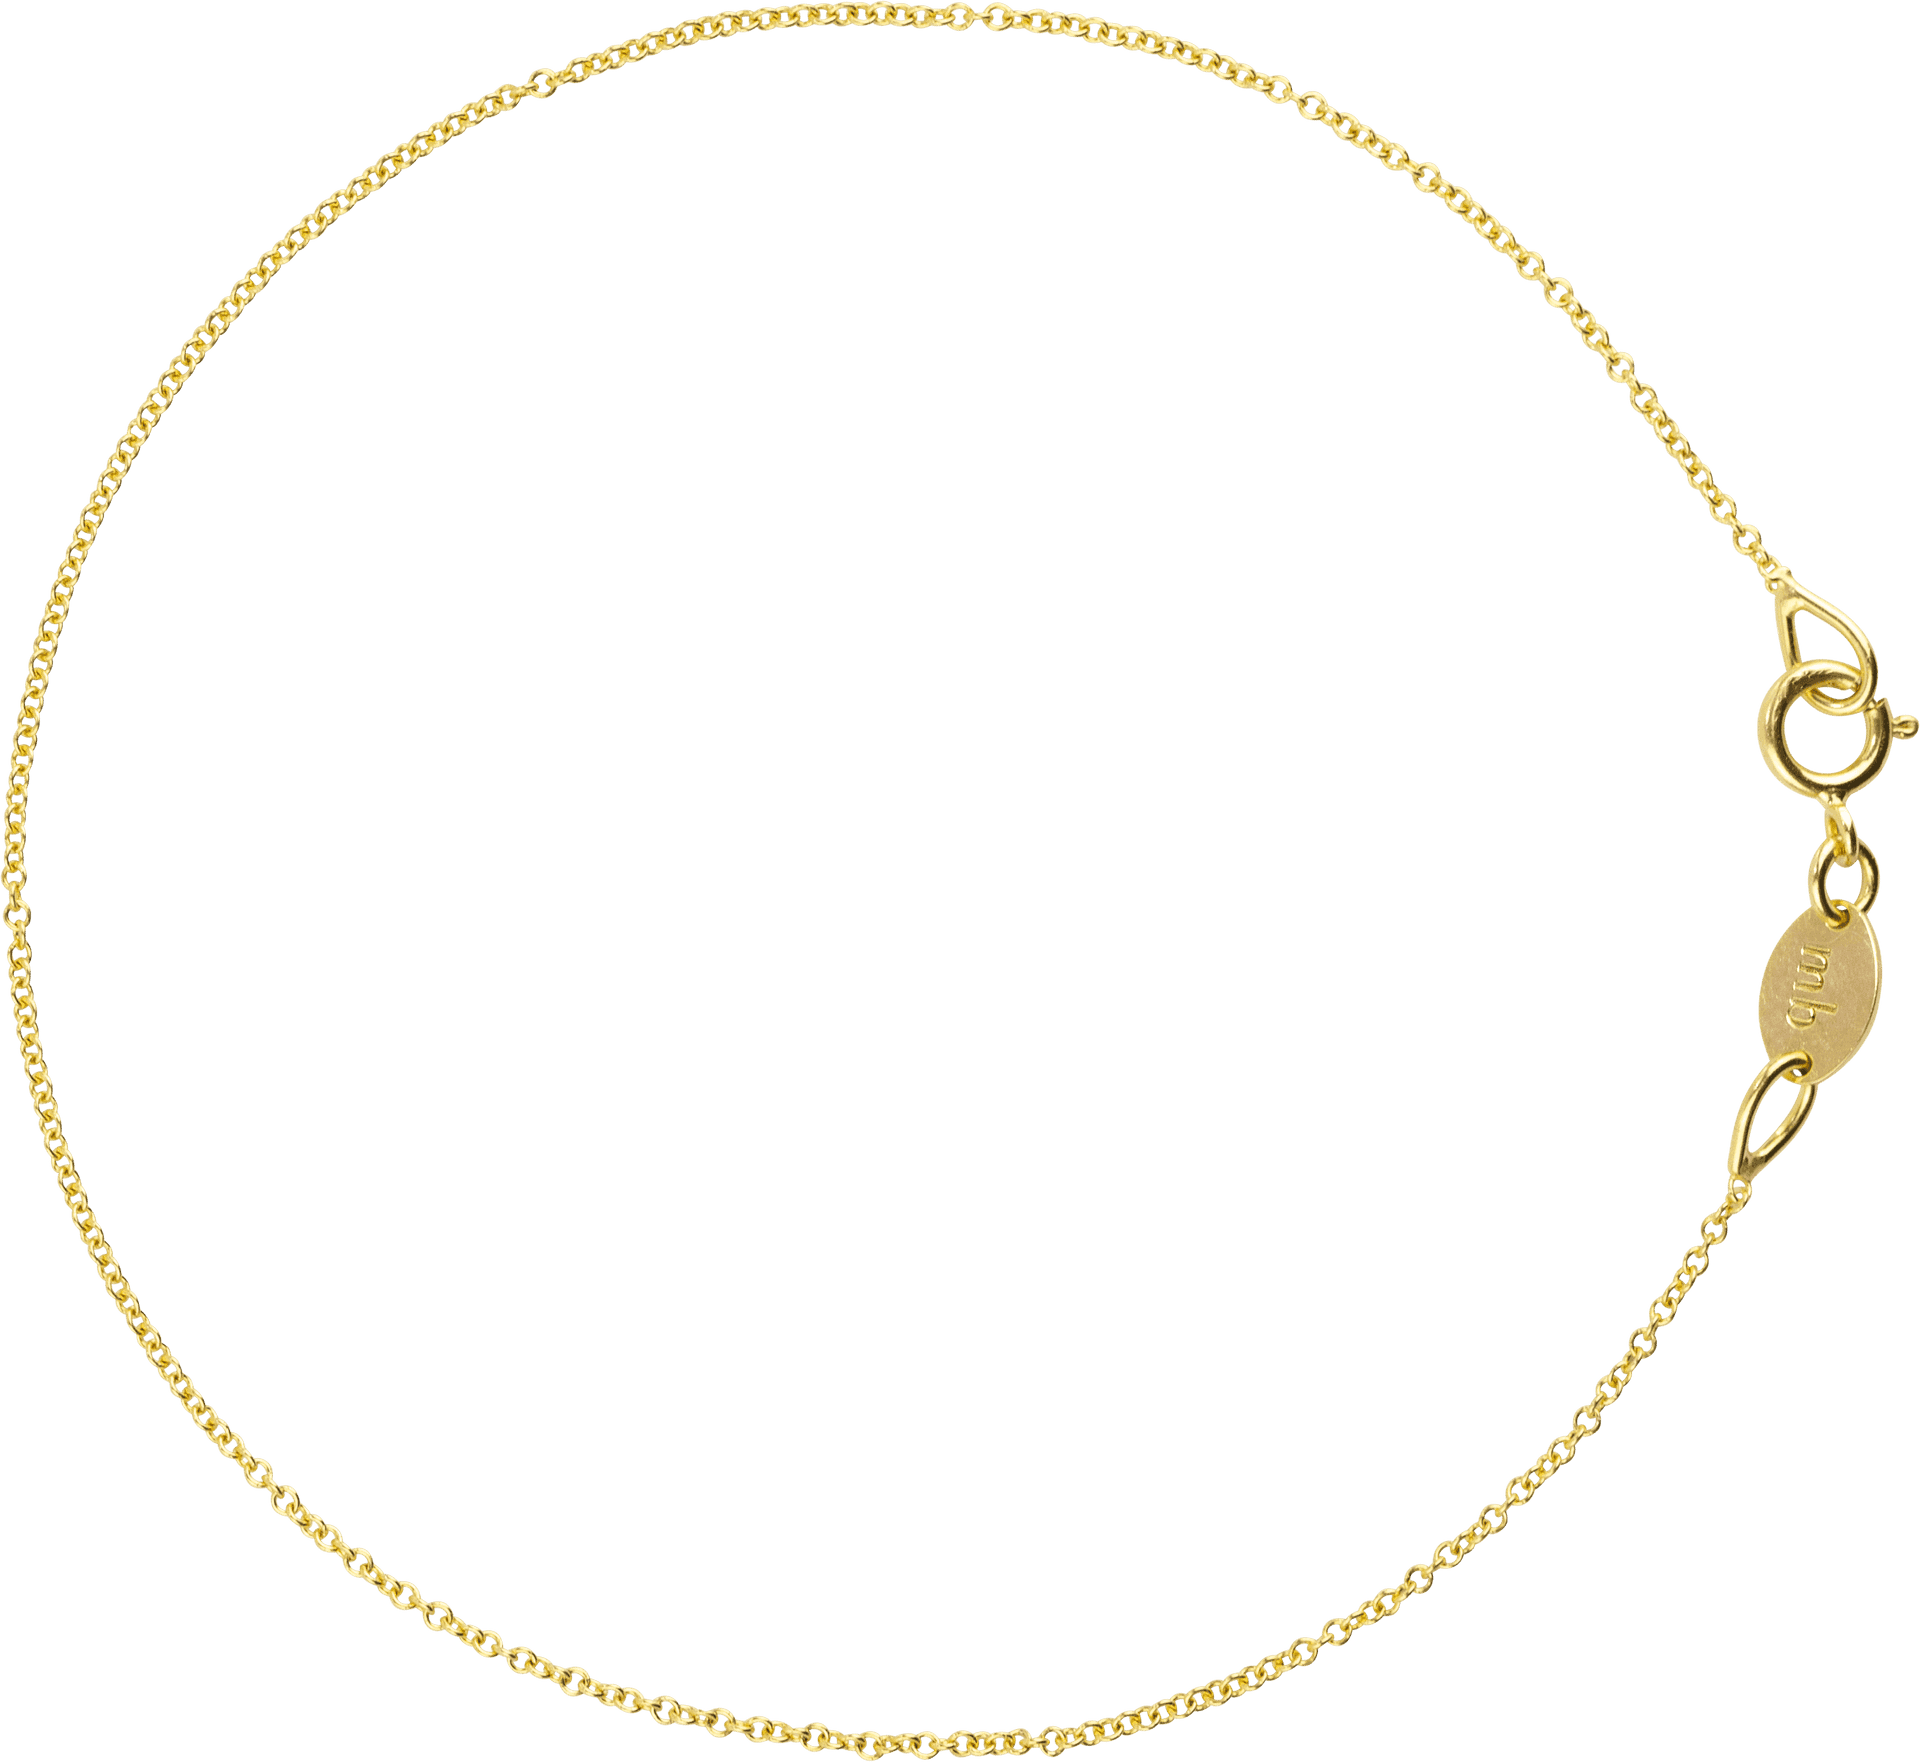 Elegant Gold Chain Isolated PNG